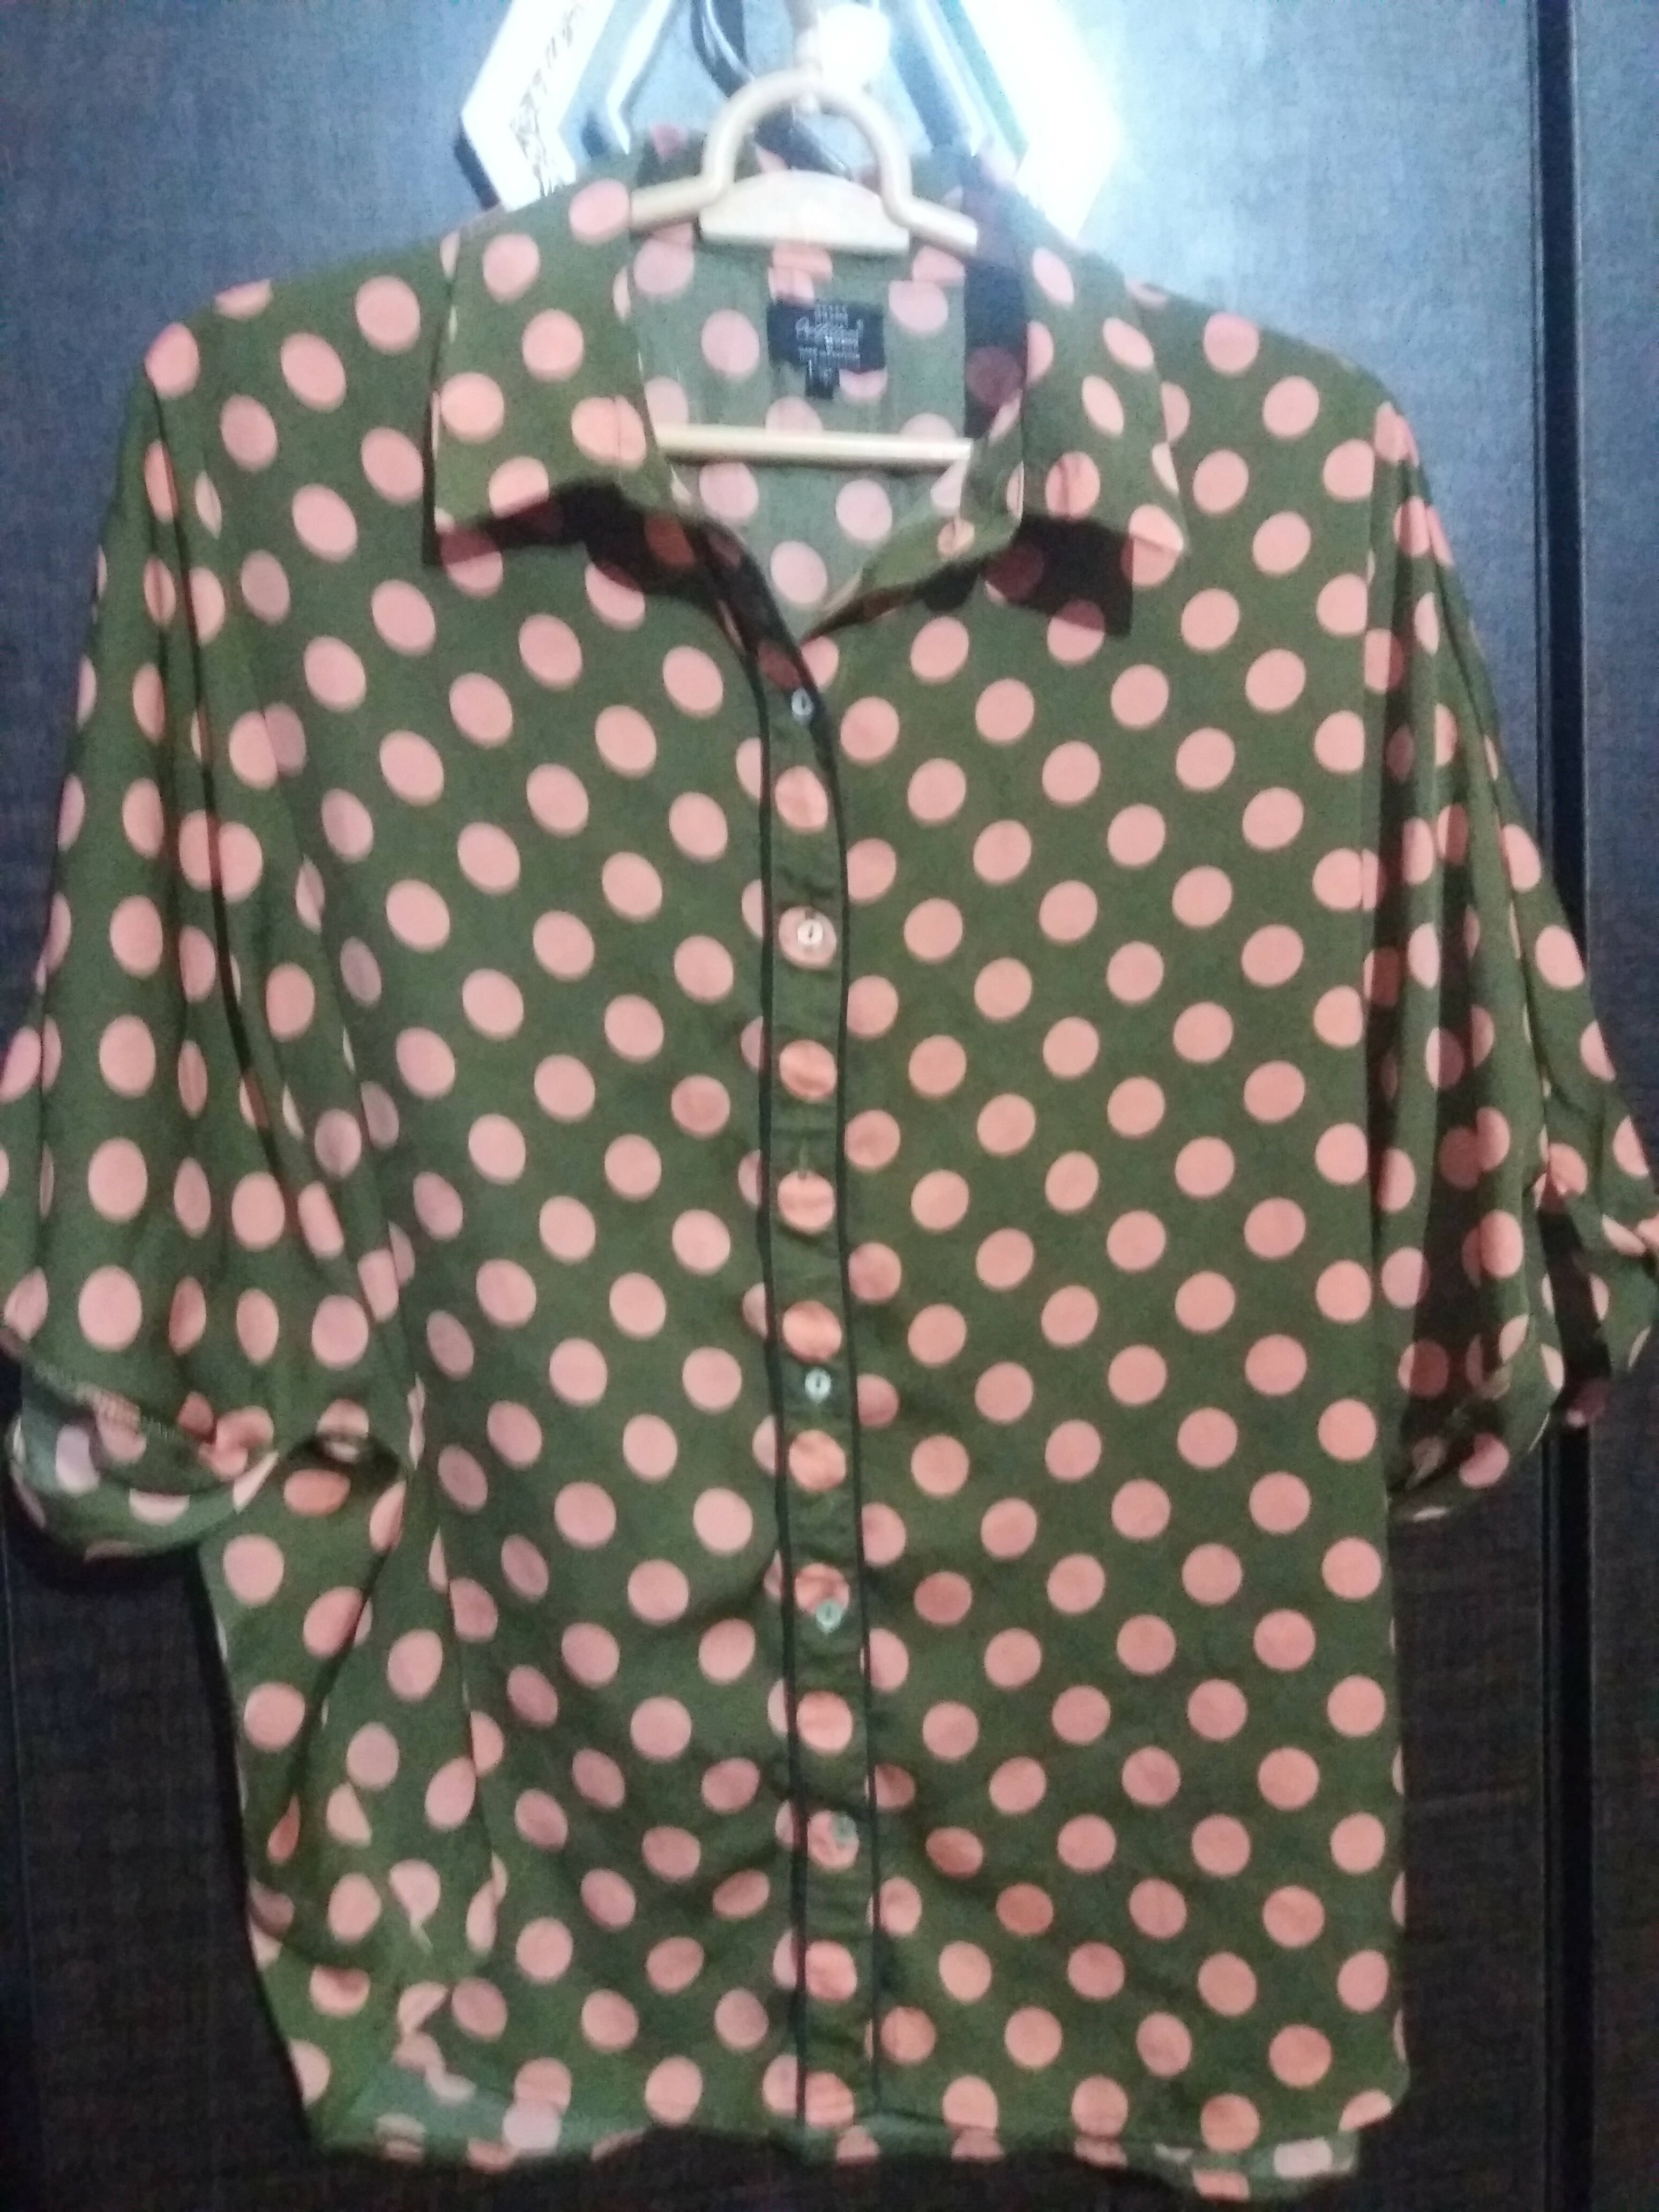 Outfitters | Black Pink Polka dots button down shirt | Women Tops & Shirts | Worn Once